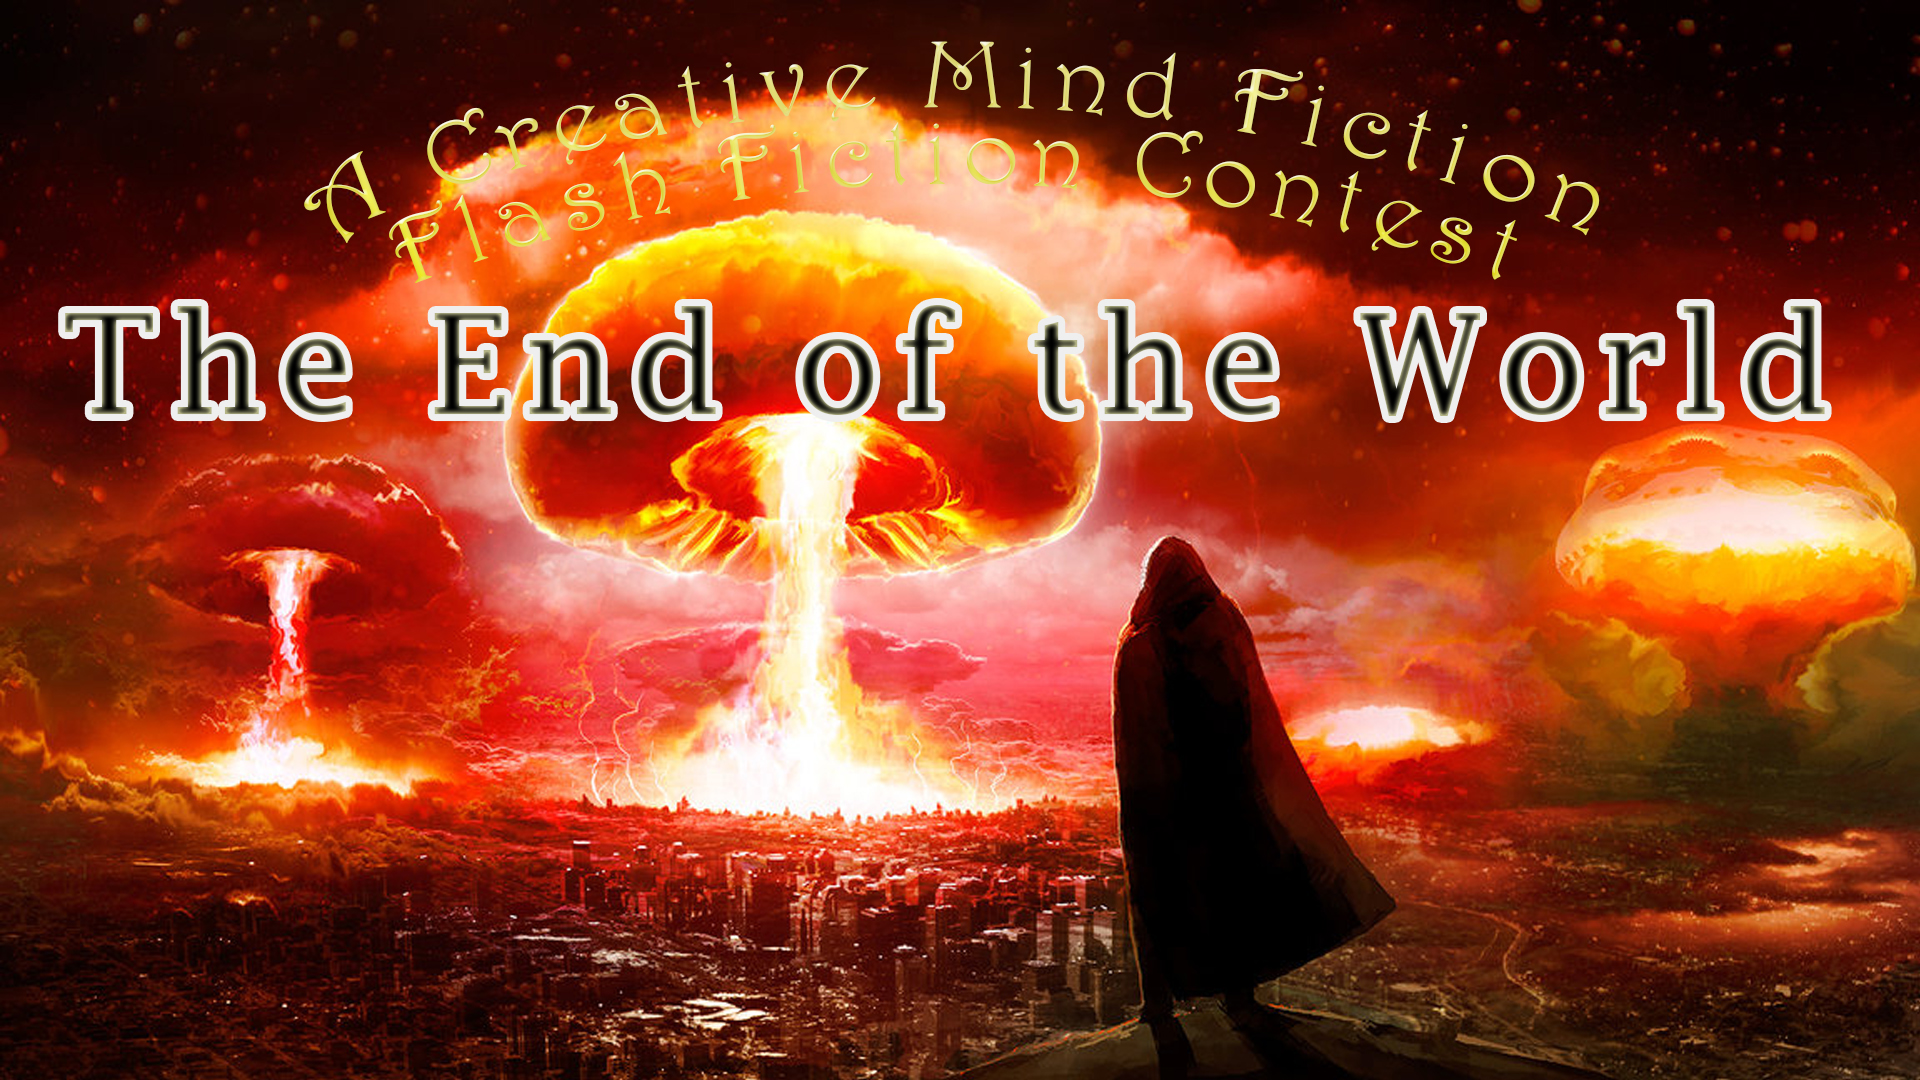 September 20 - October 4, 2018 Flash Fiction Contest “The End of the World”